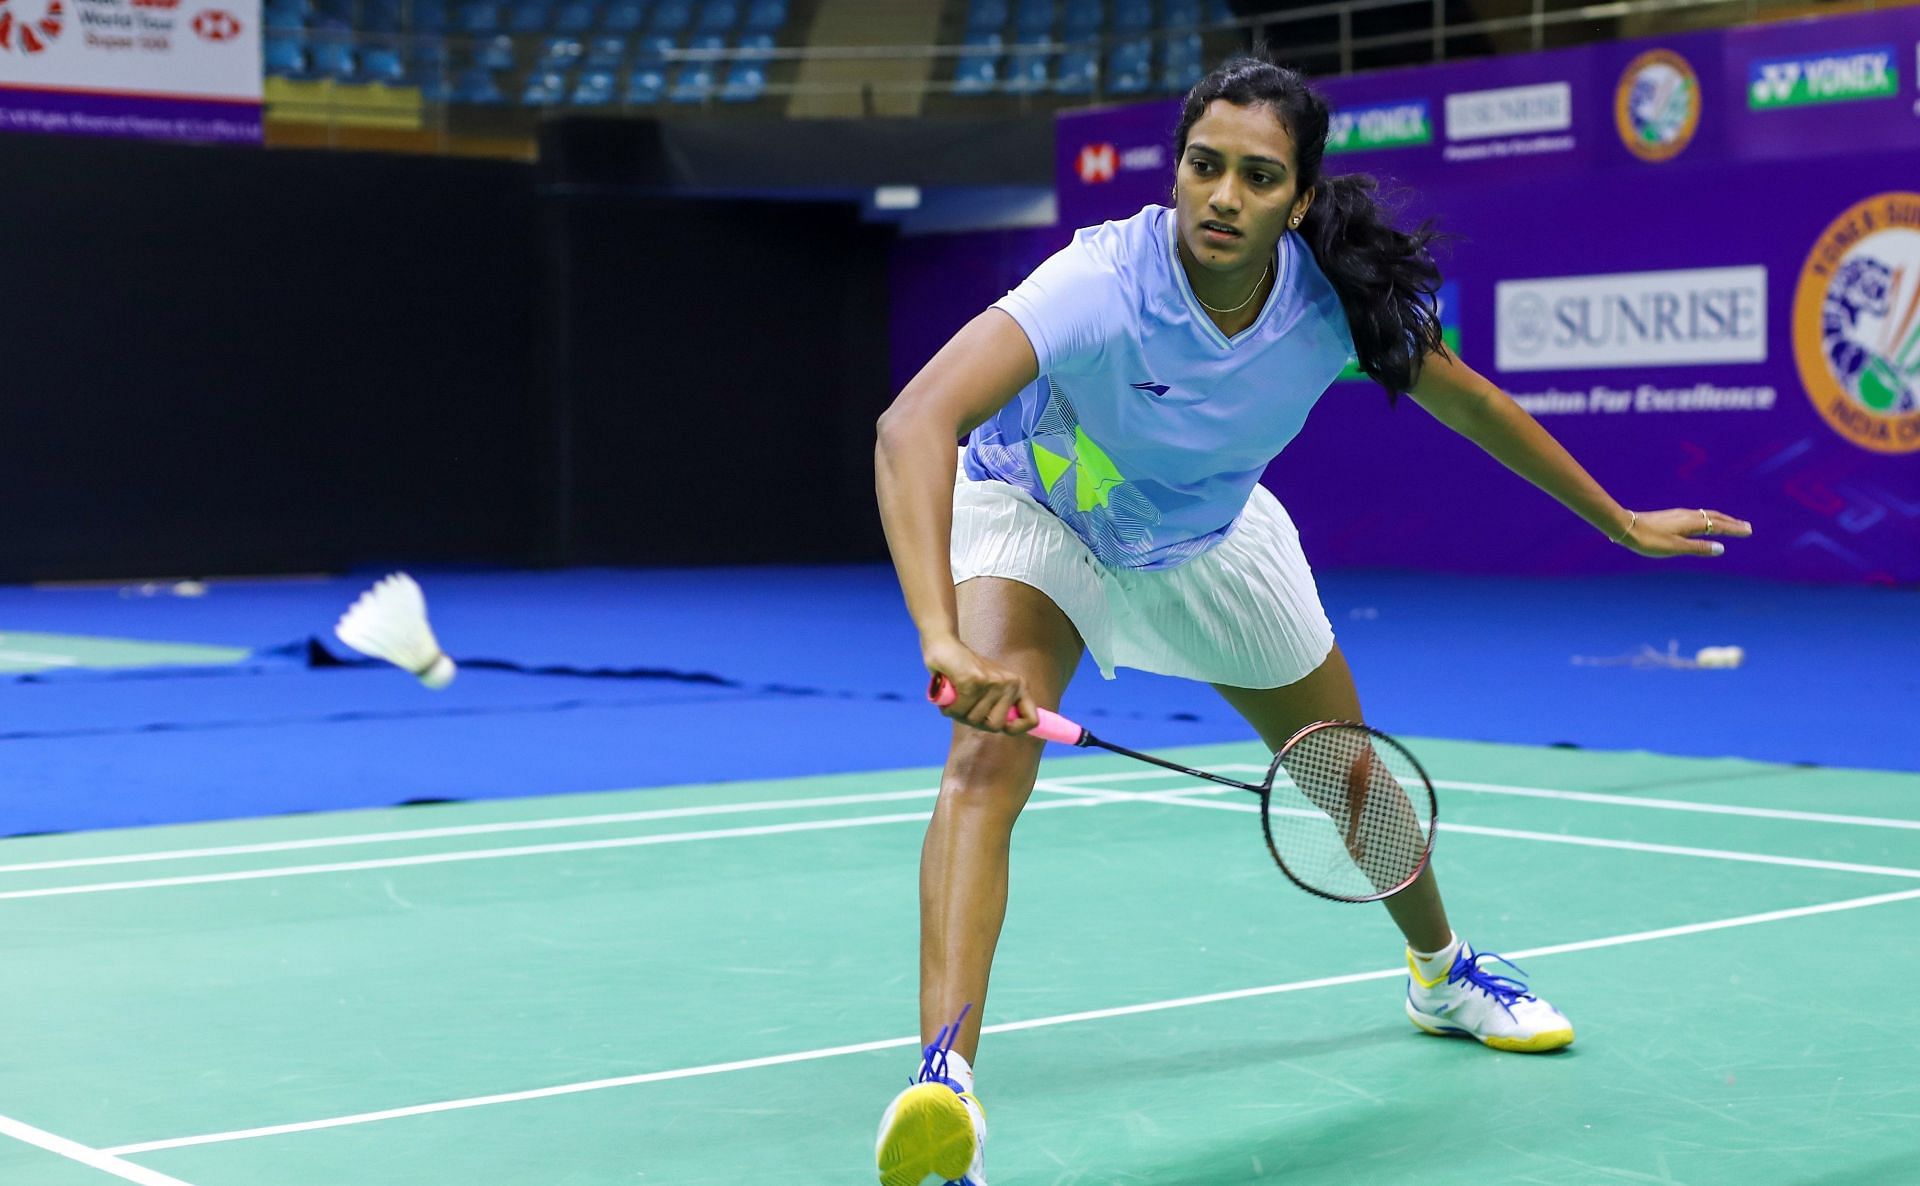 Sixth seed PV Sindhu will take on Wang Zhi Yi of China in the first round of the All England Open Championships on Wednesday. (Pic credit: BAI)